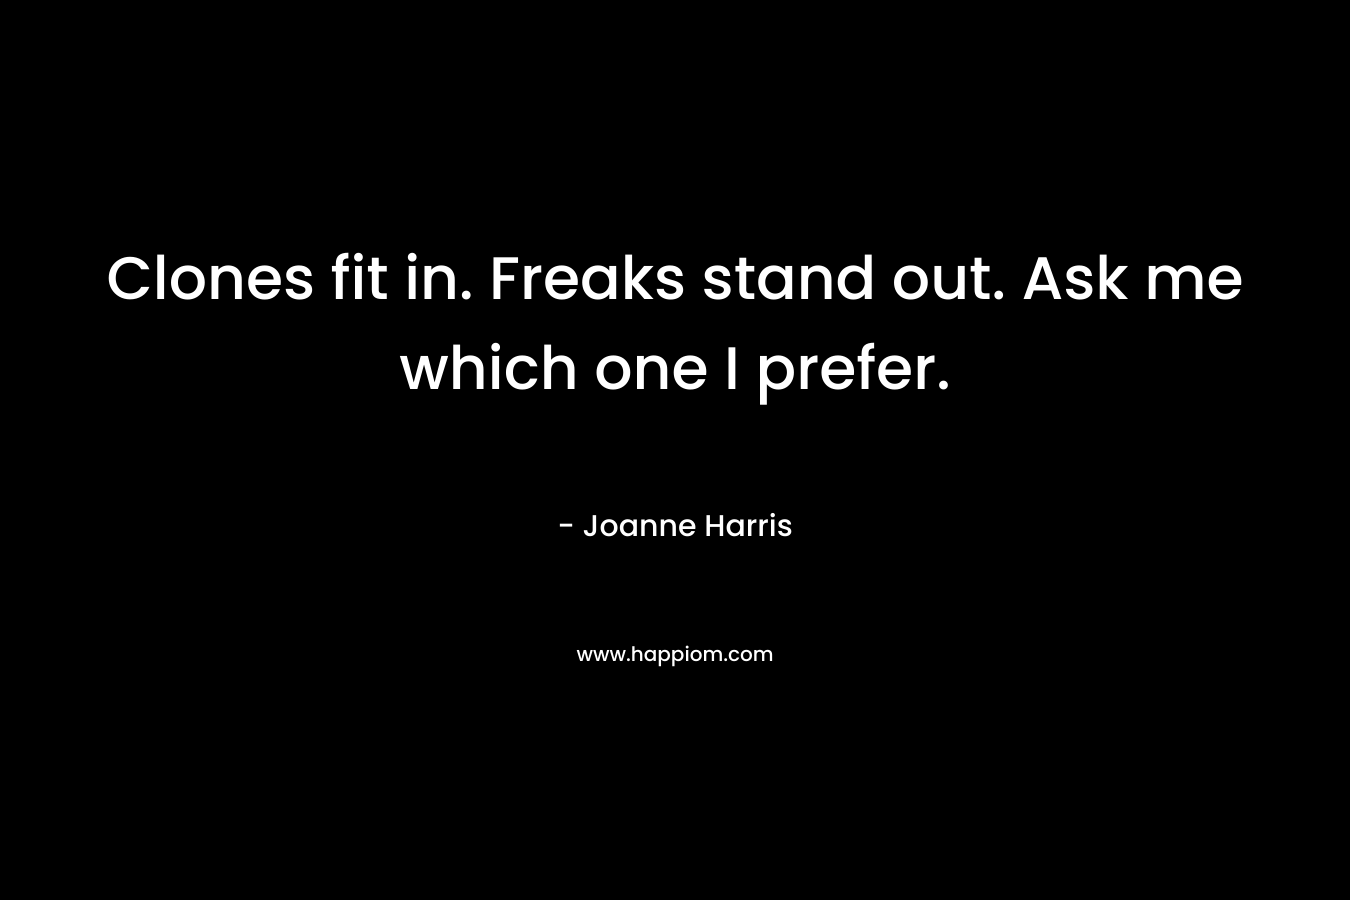 Clones fit in. Freaks stand out. Ask me which one I prefer. – Joanne Harris